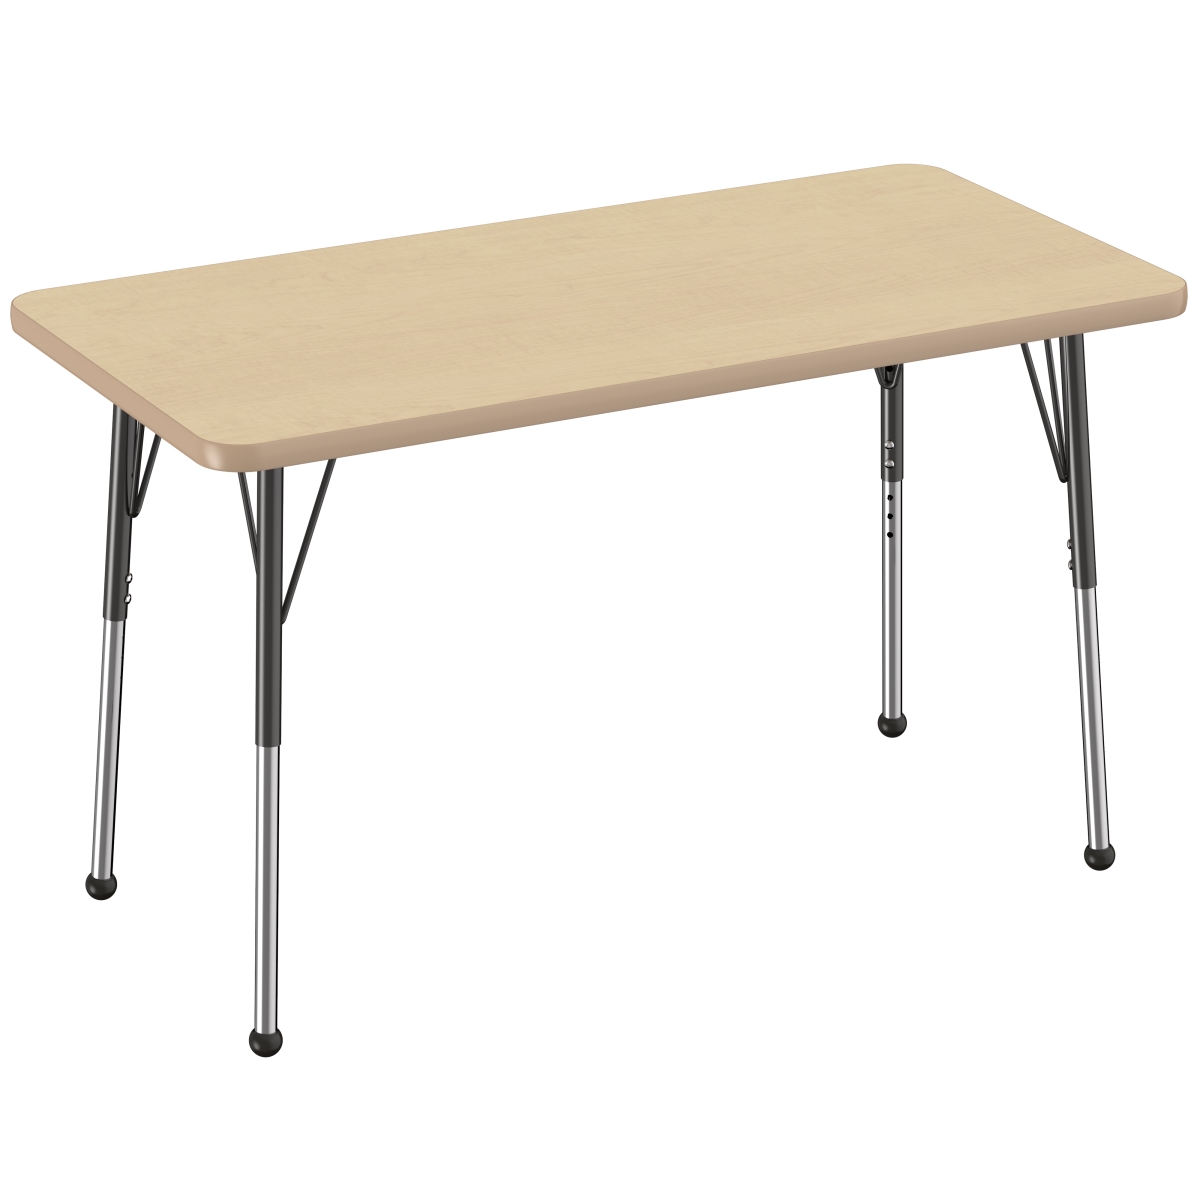 10008-mpmp 24 X 48 In. Rectangle T-mold Adjustable Activity Table With Standard Ball - Maple